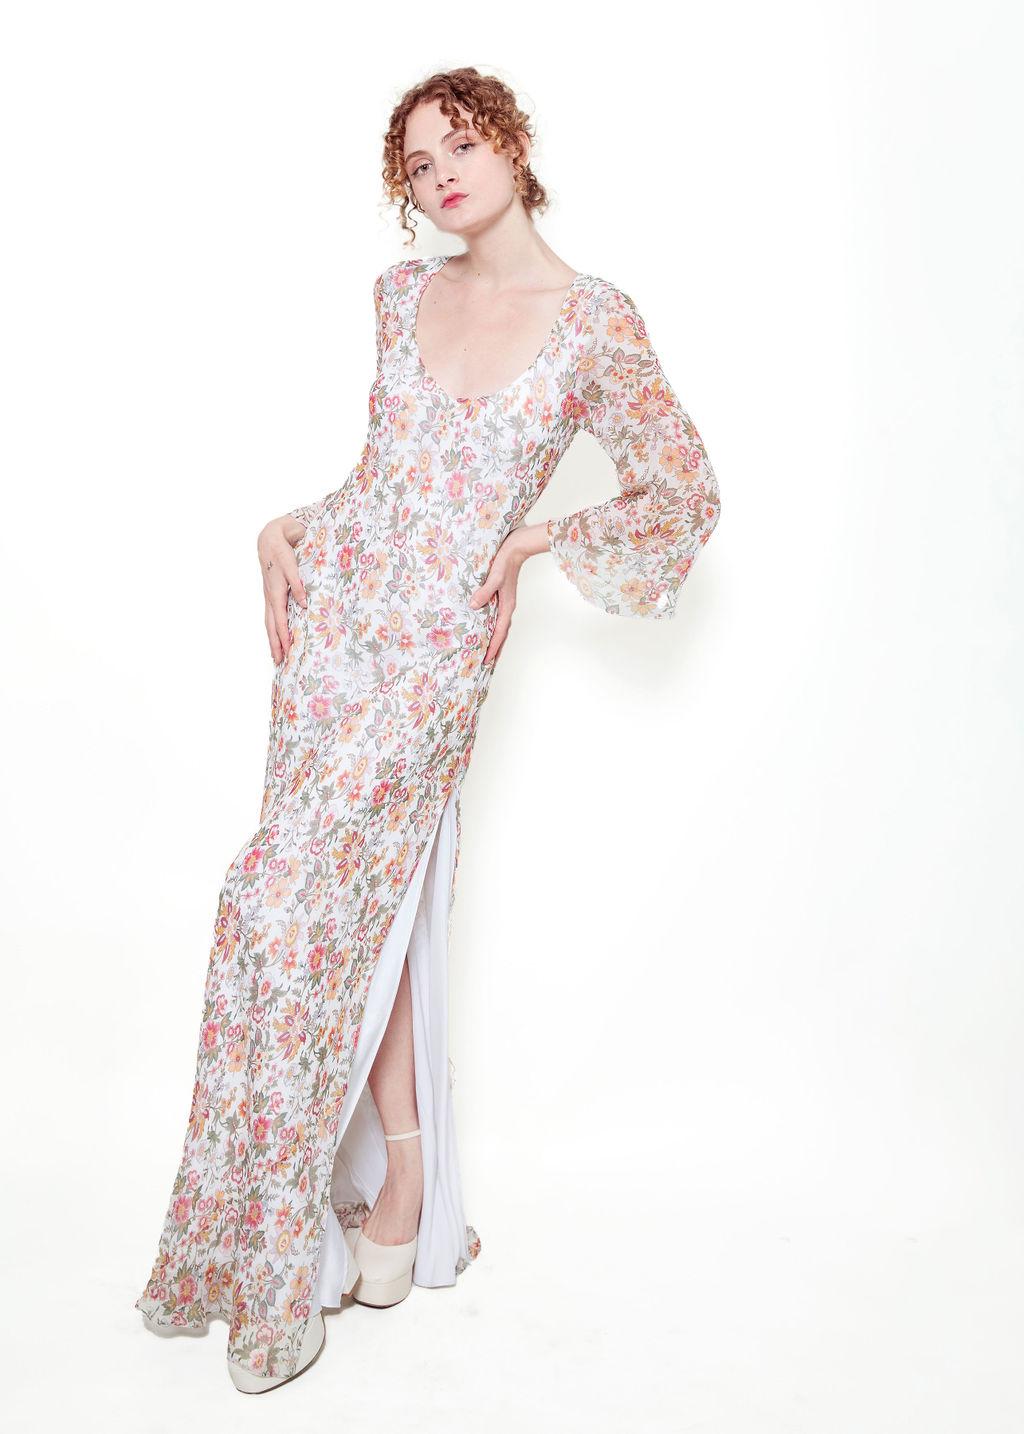 Who said floral dresses have to be frumpy?

Our Jane Booke dress is the perfect mix of girly-chic and sophistication. It is made from silk chiffon with a sexy 30